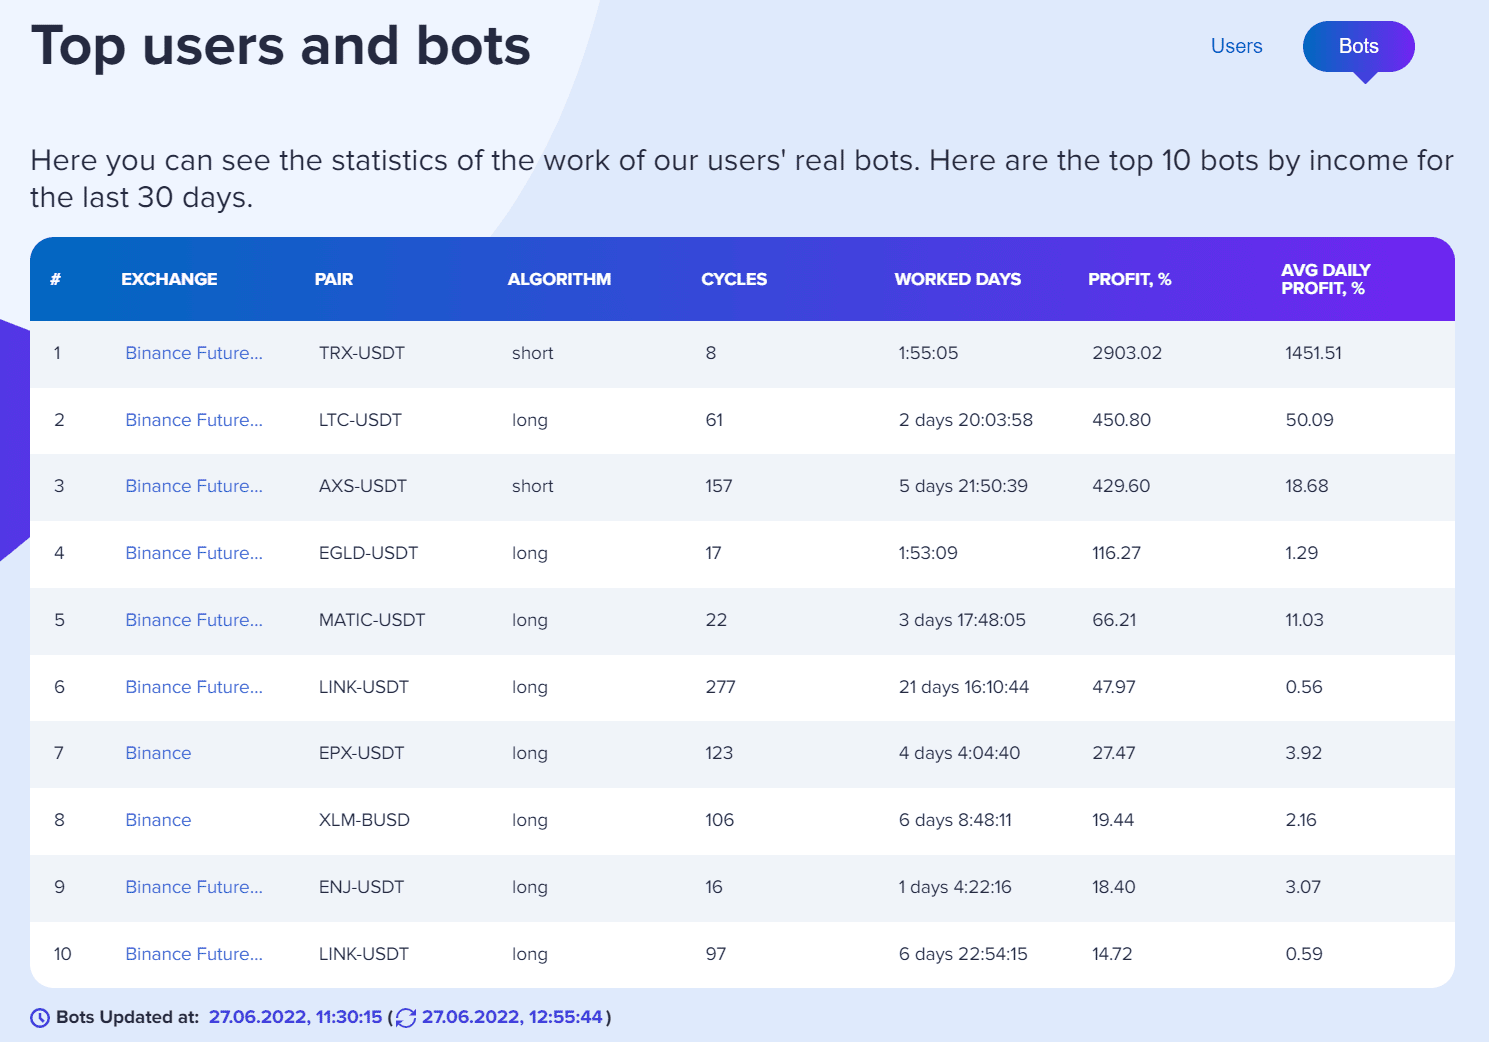 The top users and bots of the platform